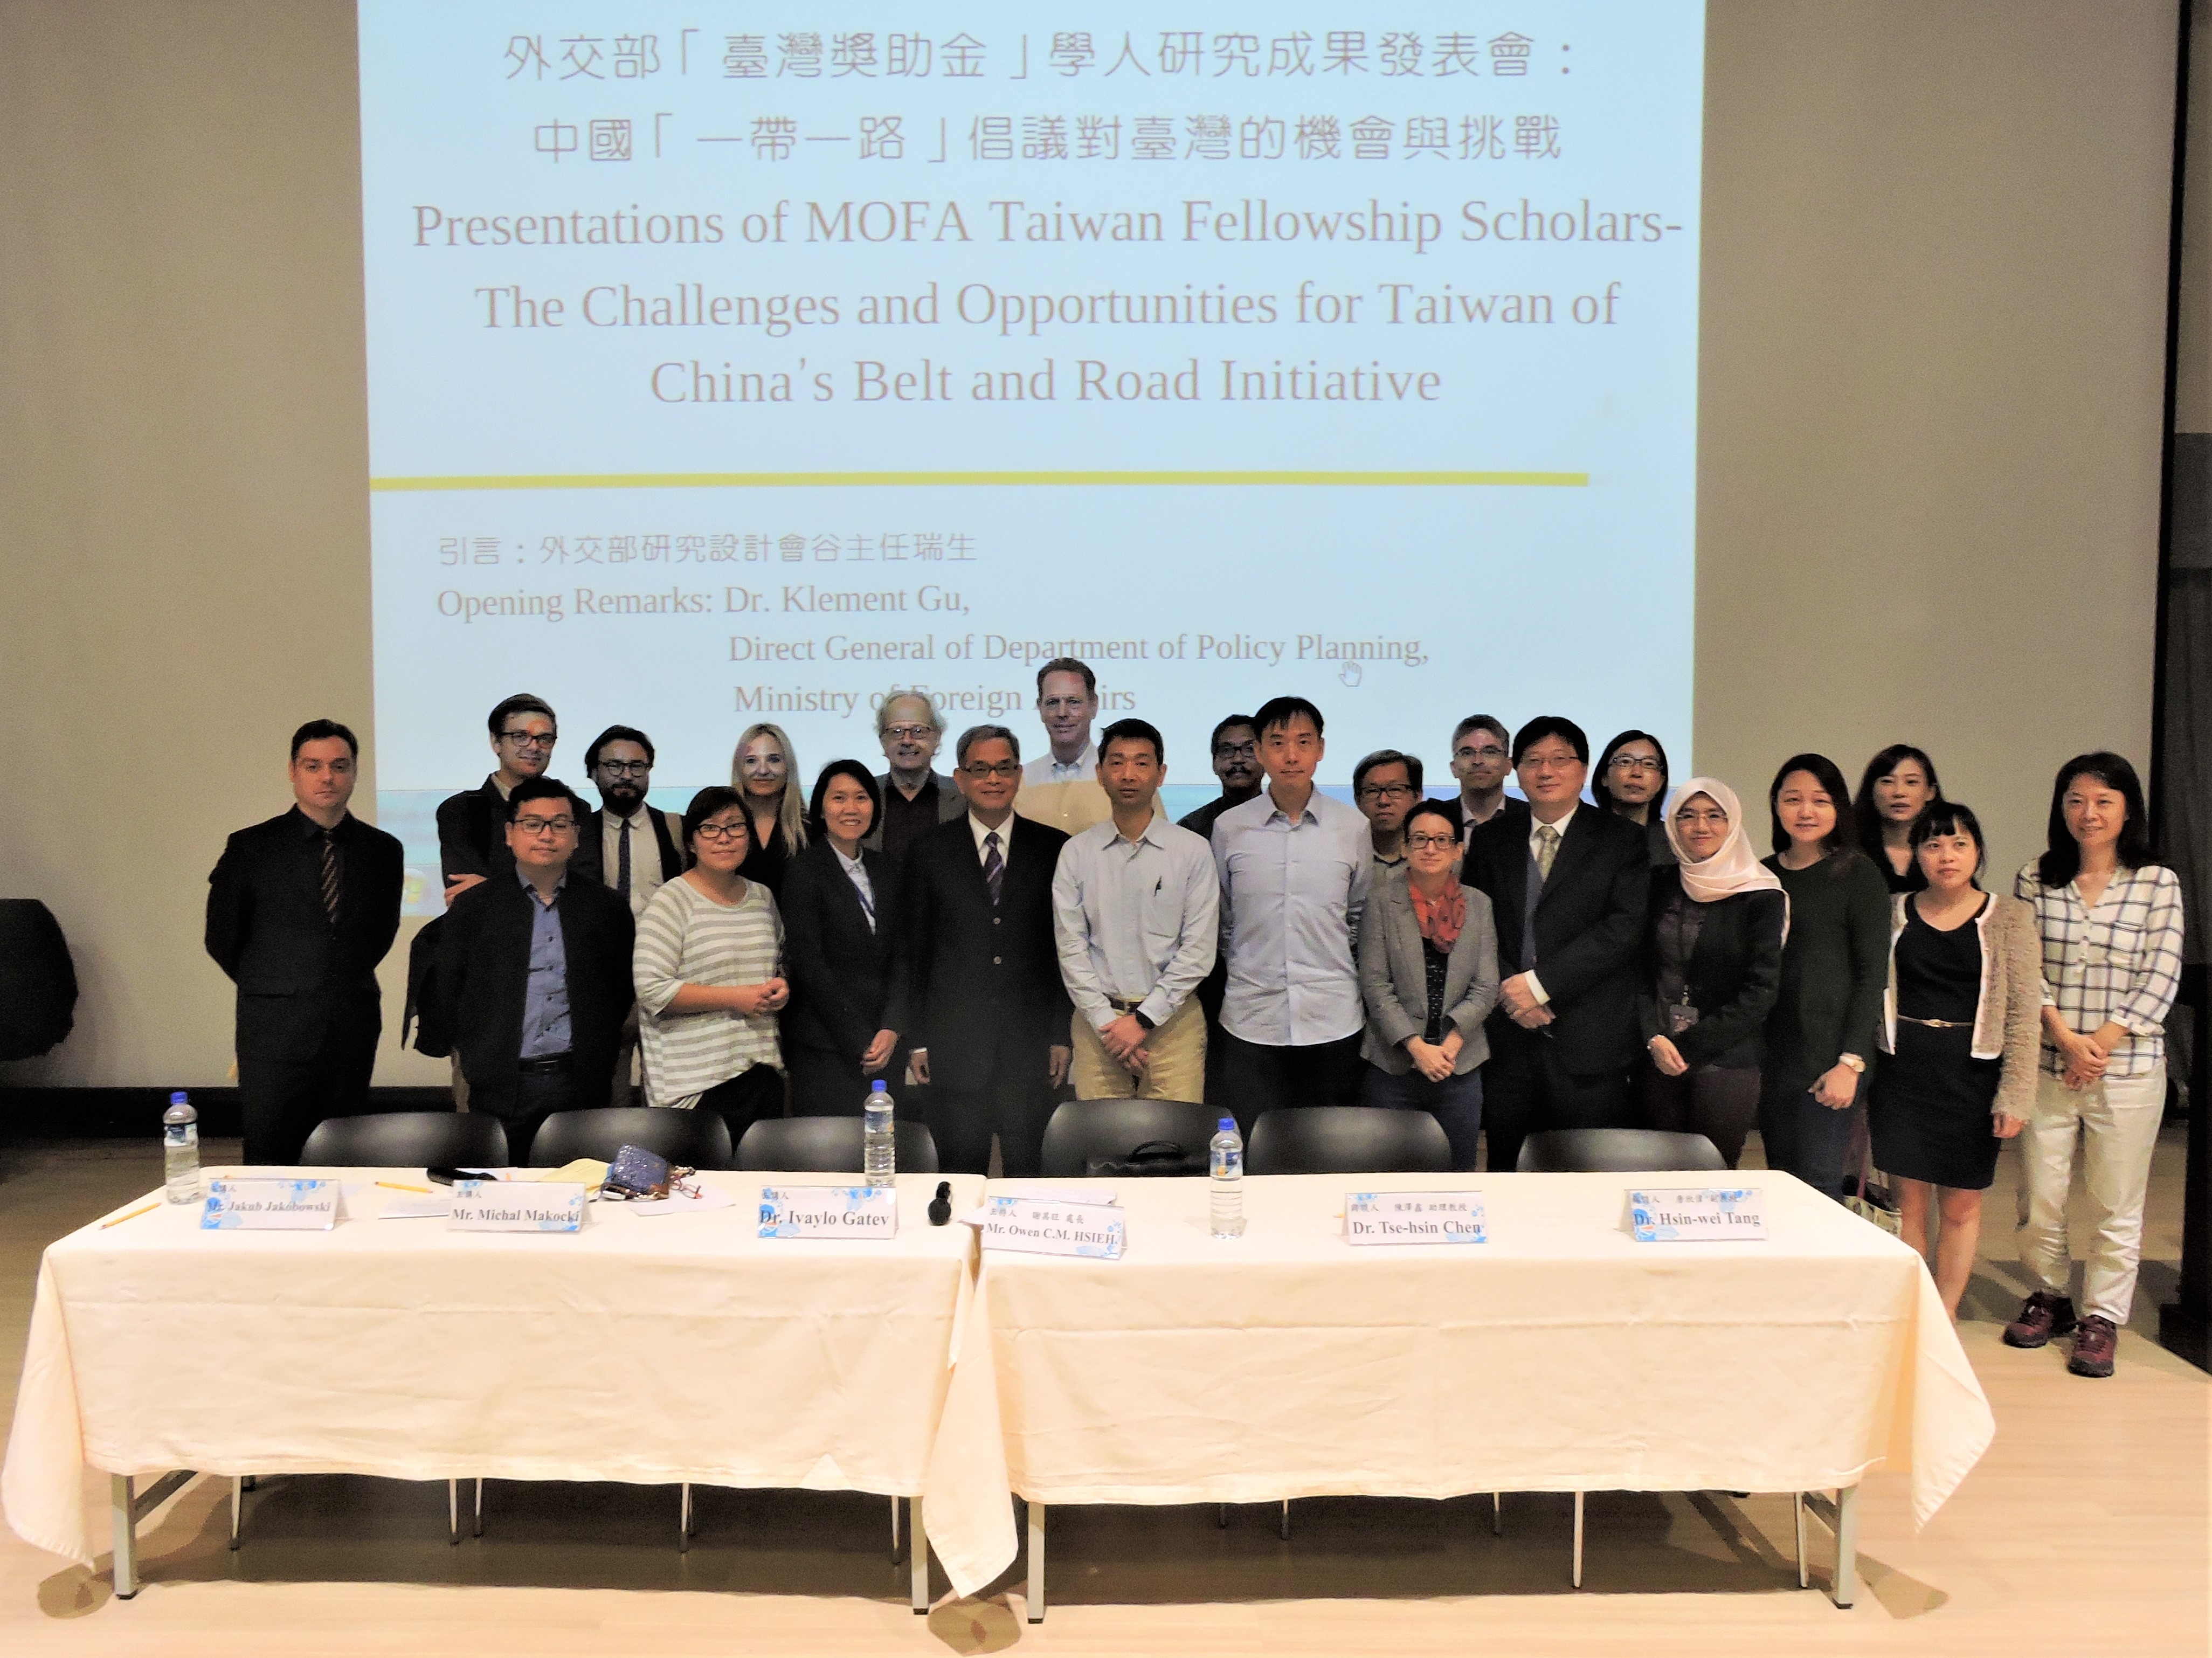 Link: 2018 4th Presentations of MOFA Taiwan Fellowship Scholars - The Challenges and Opportunities for Taiwan of China’s Belt and Road Initiative at NTPU